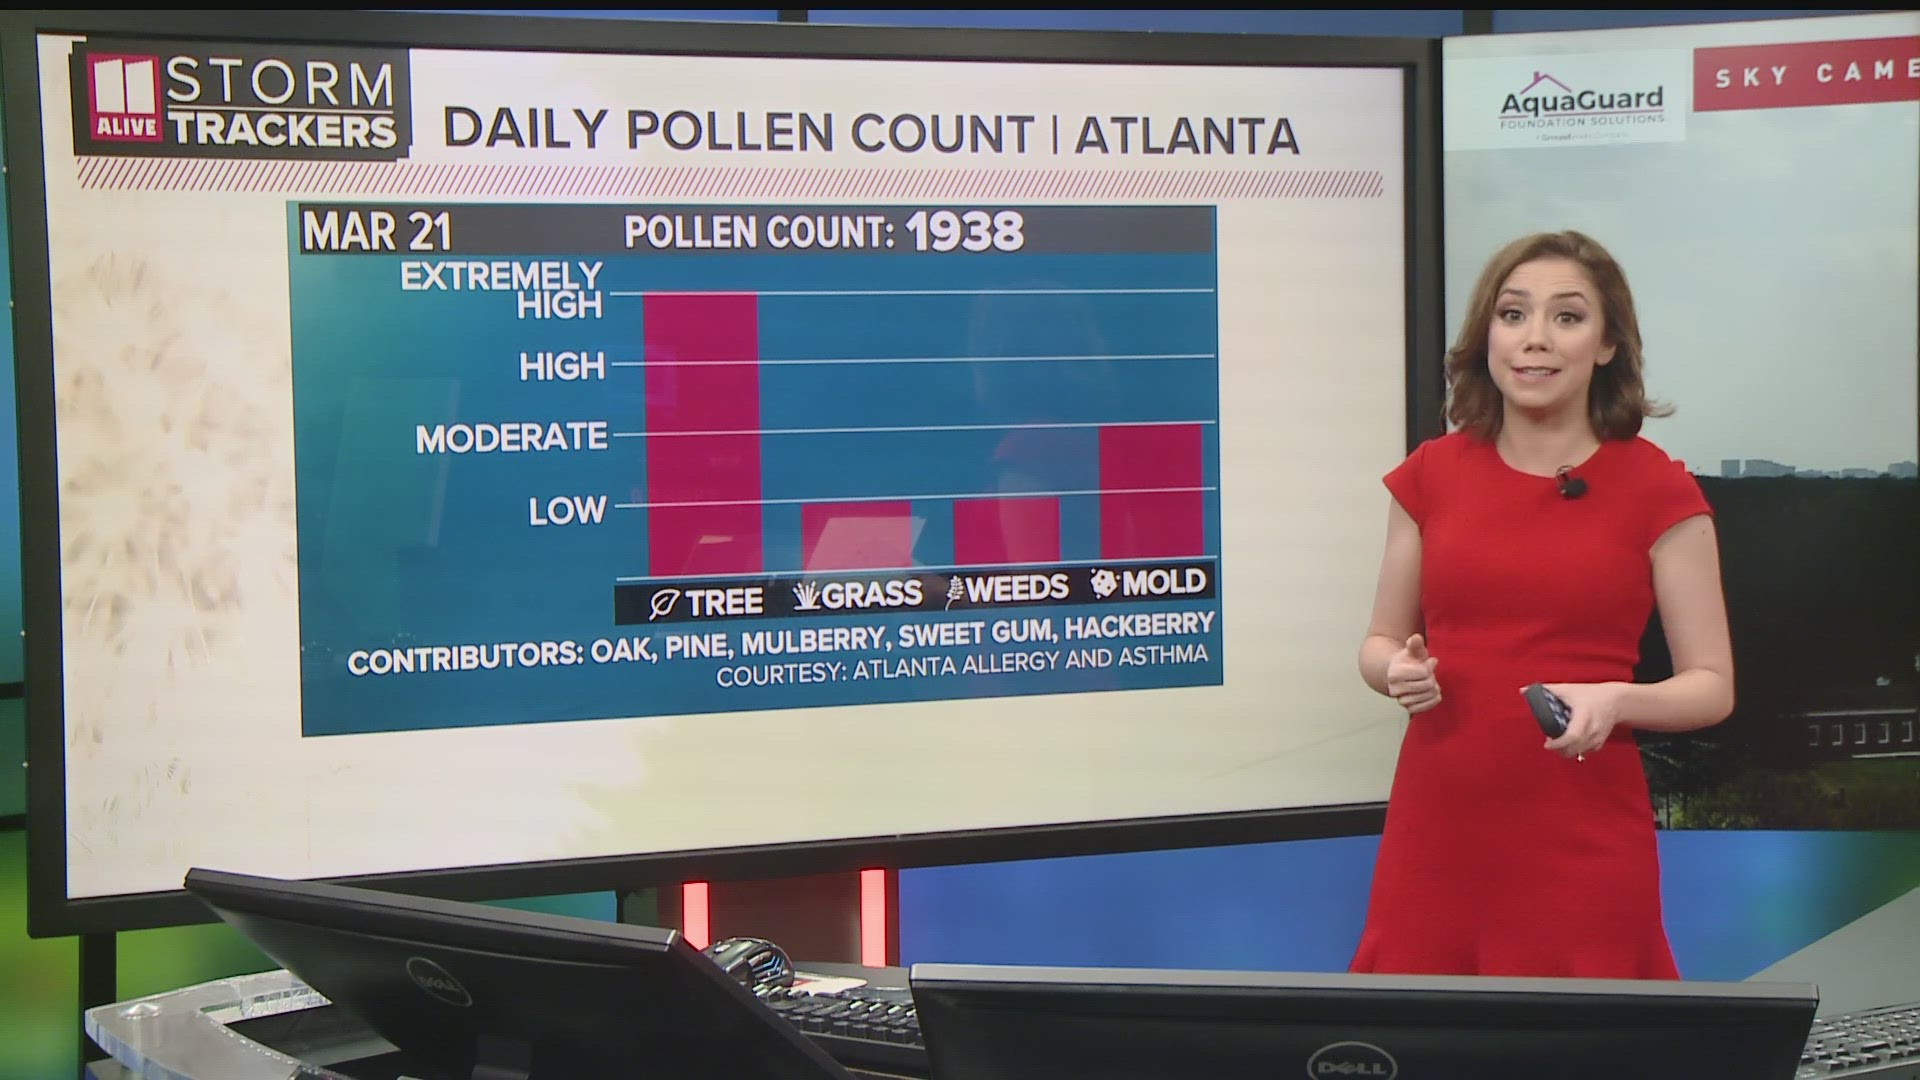 Oak, Pine, Mulberry, Sweet Gum, and Hackberry are the main tree pollen contributors